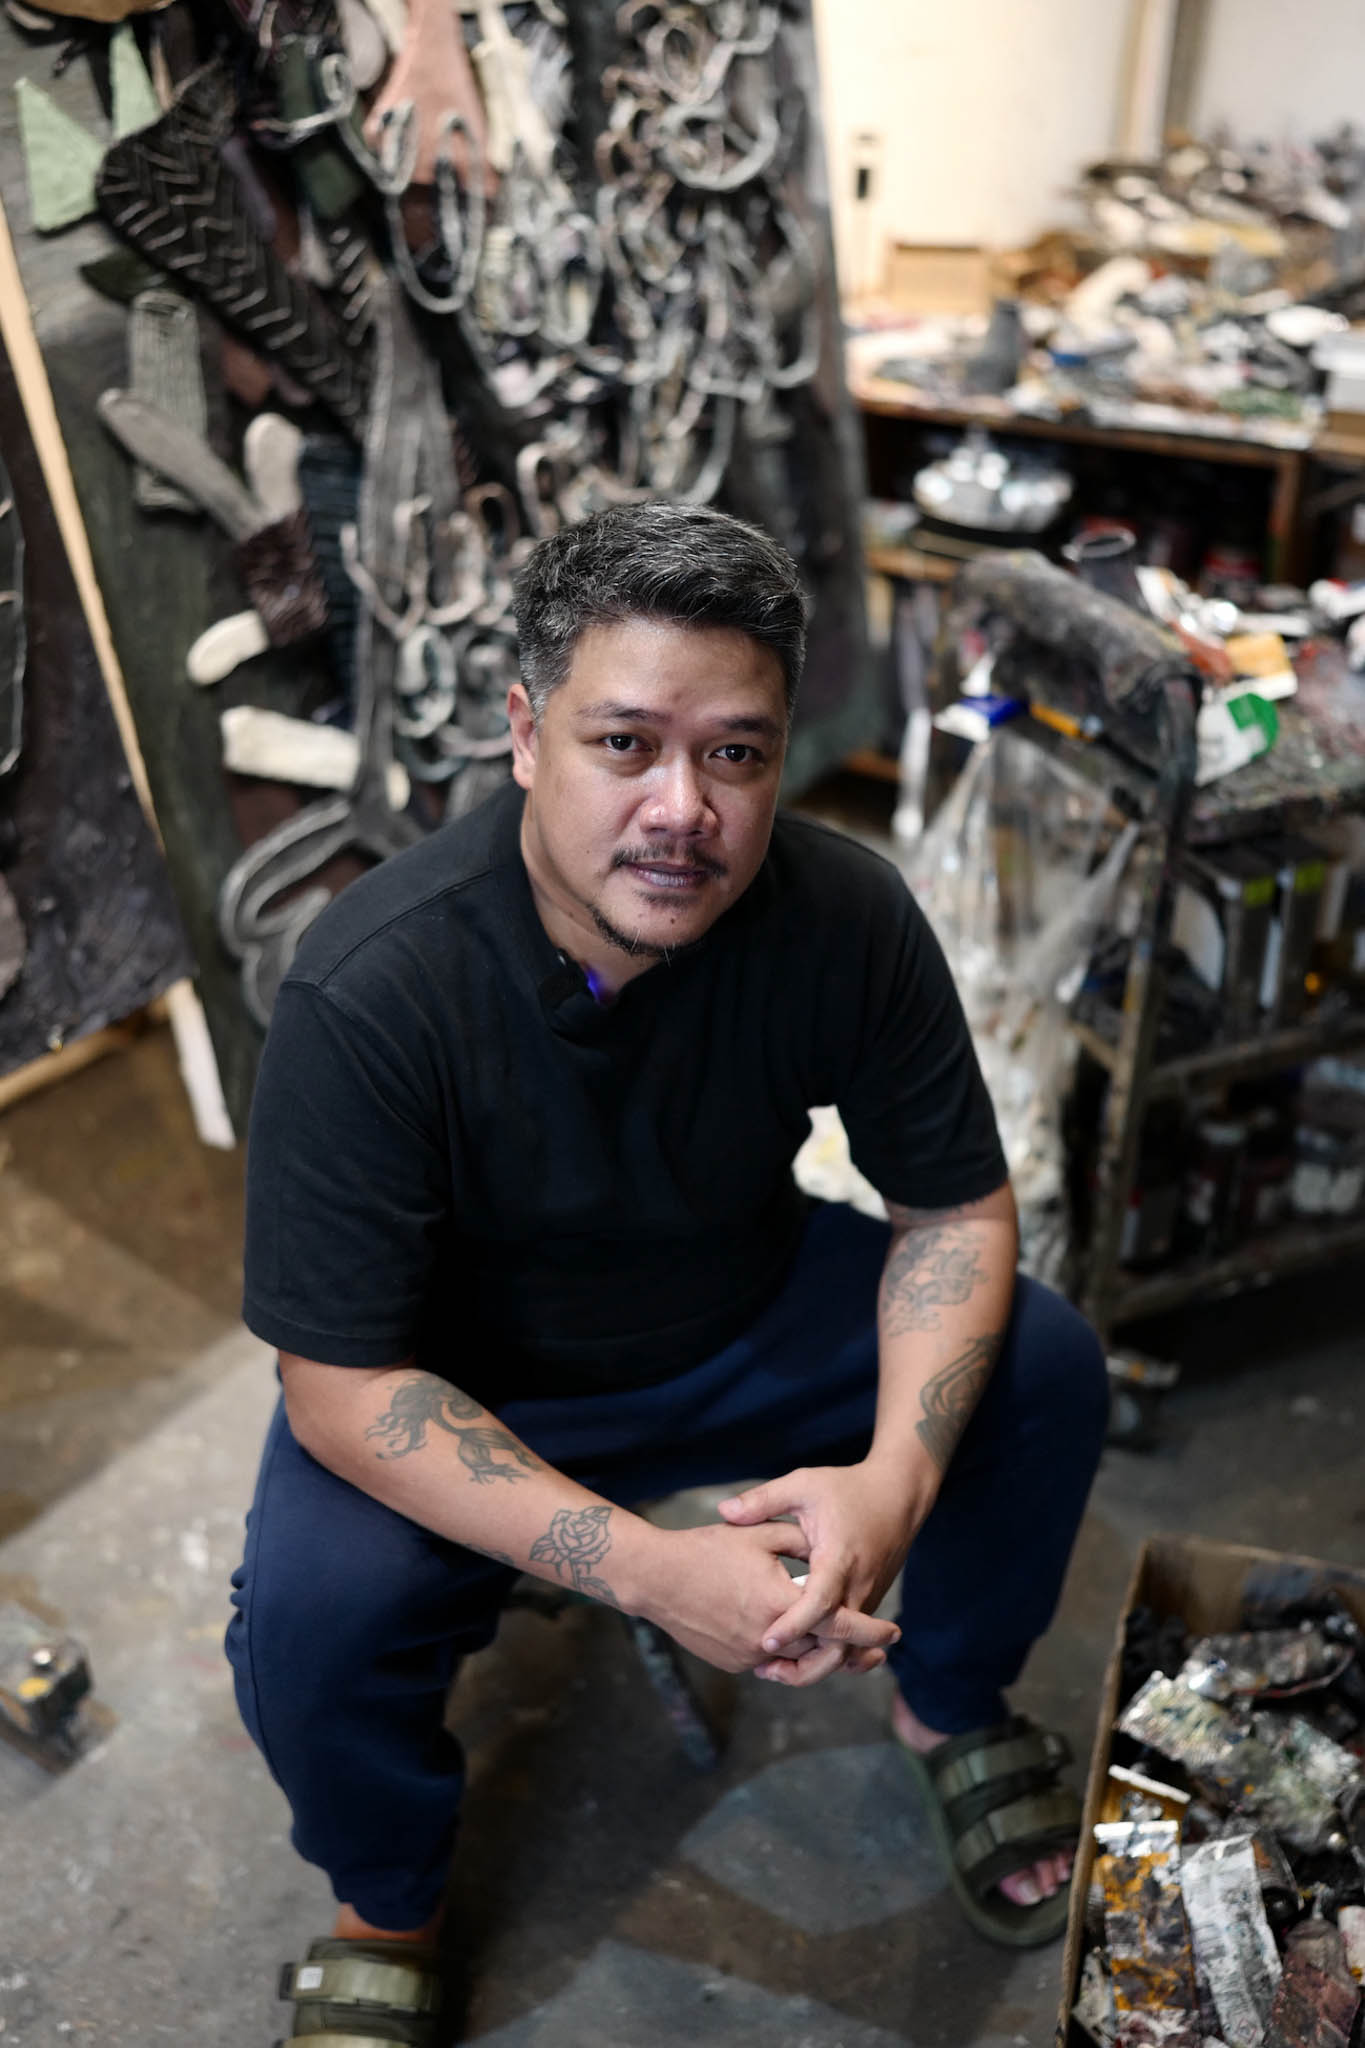 An artist squats in his studio surrounded by his art materials.